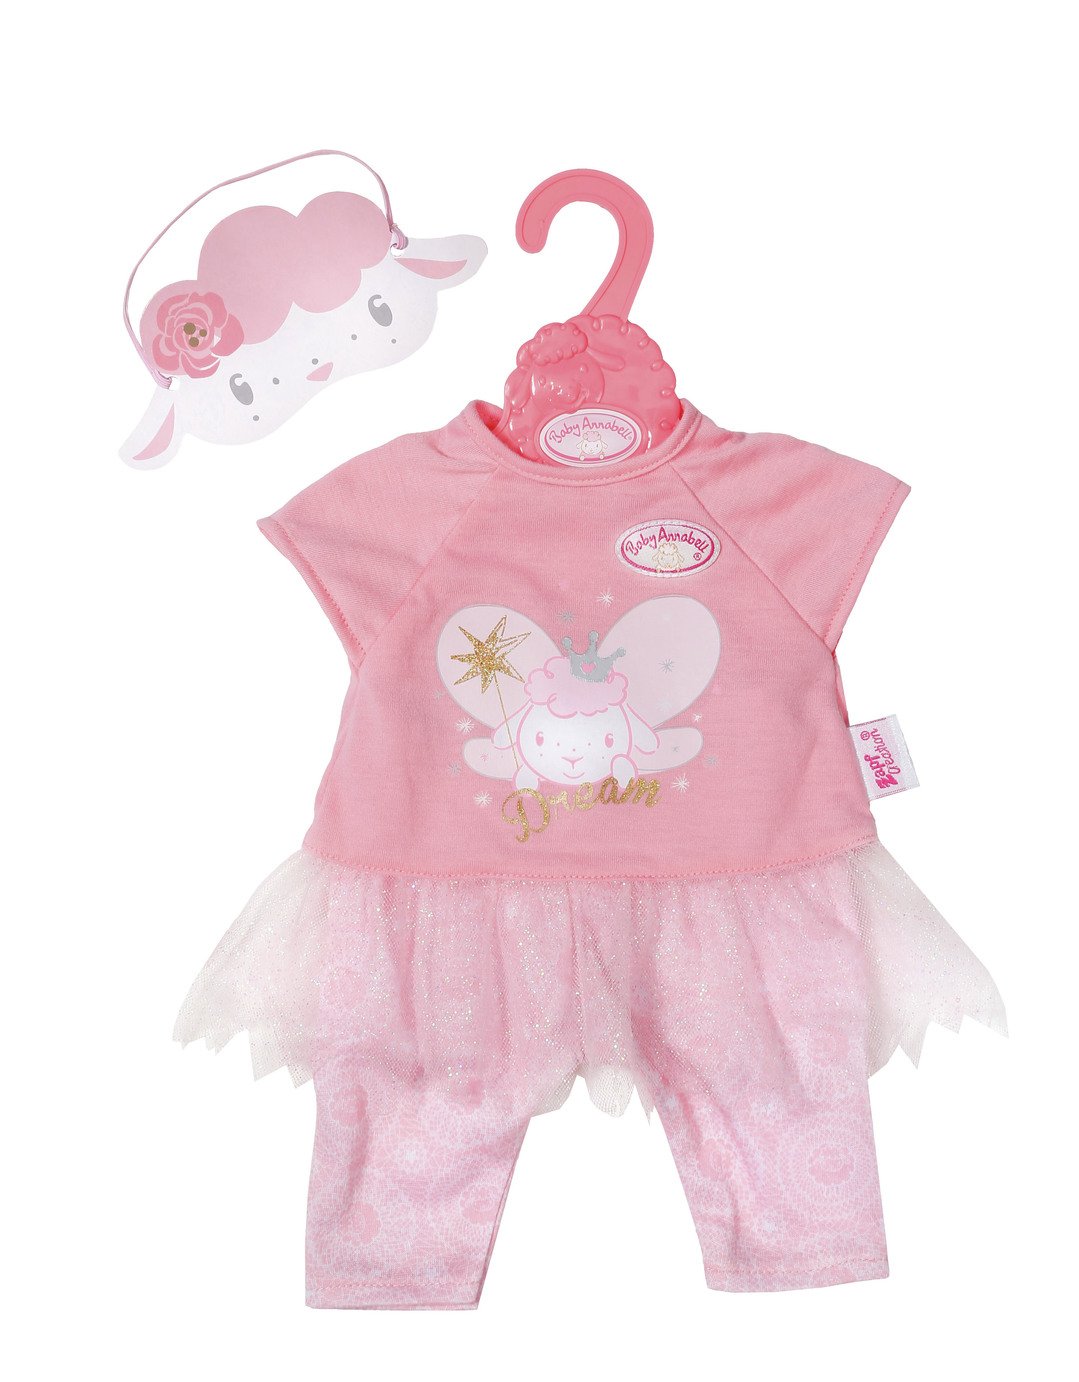 Baby Annabell Sweet Dreams Fairy Outfit Review